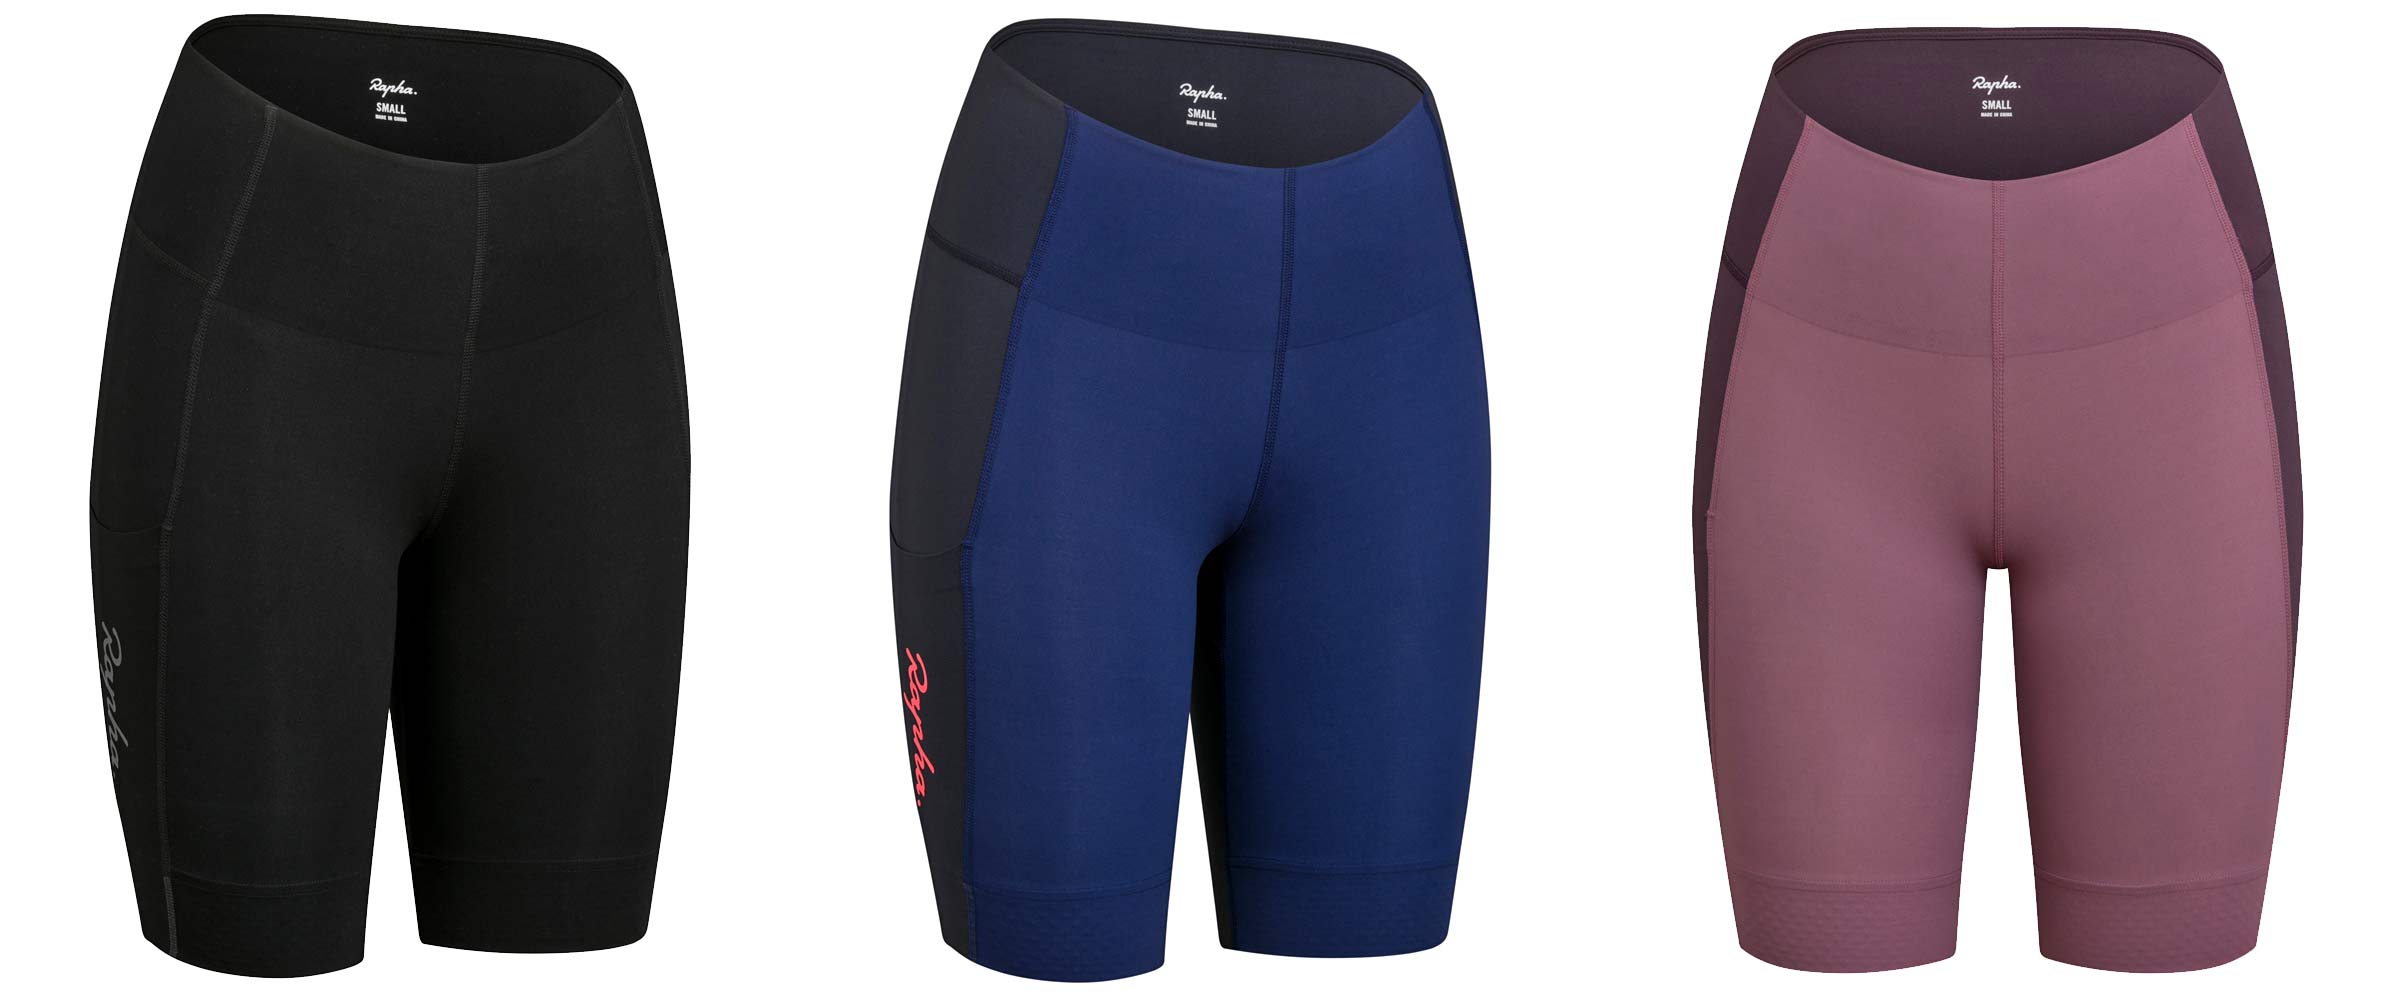 Rapha Women's All Day Leggings and Shorts, shorts